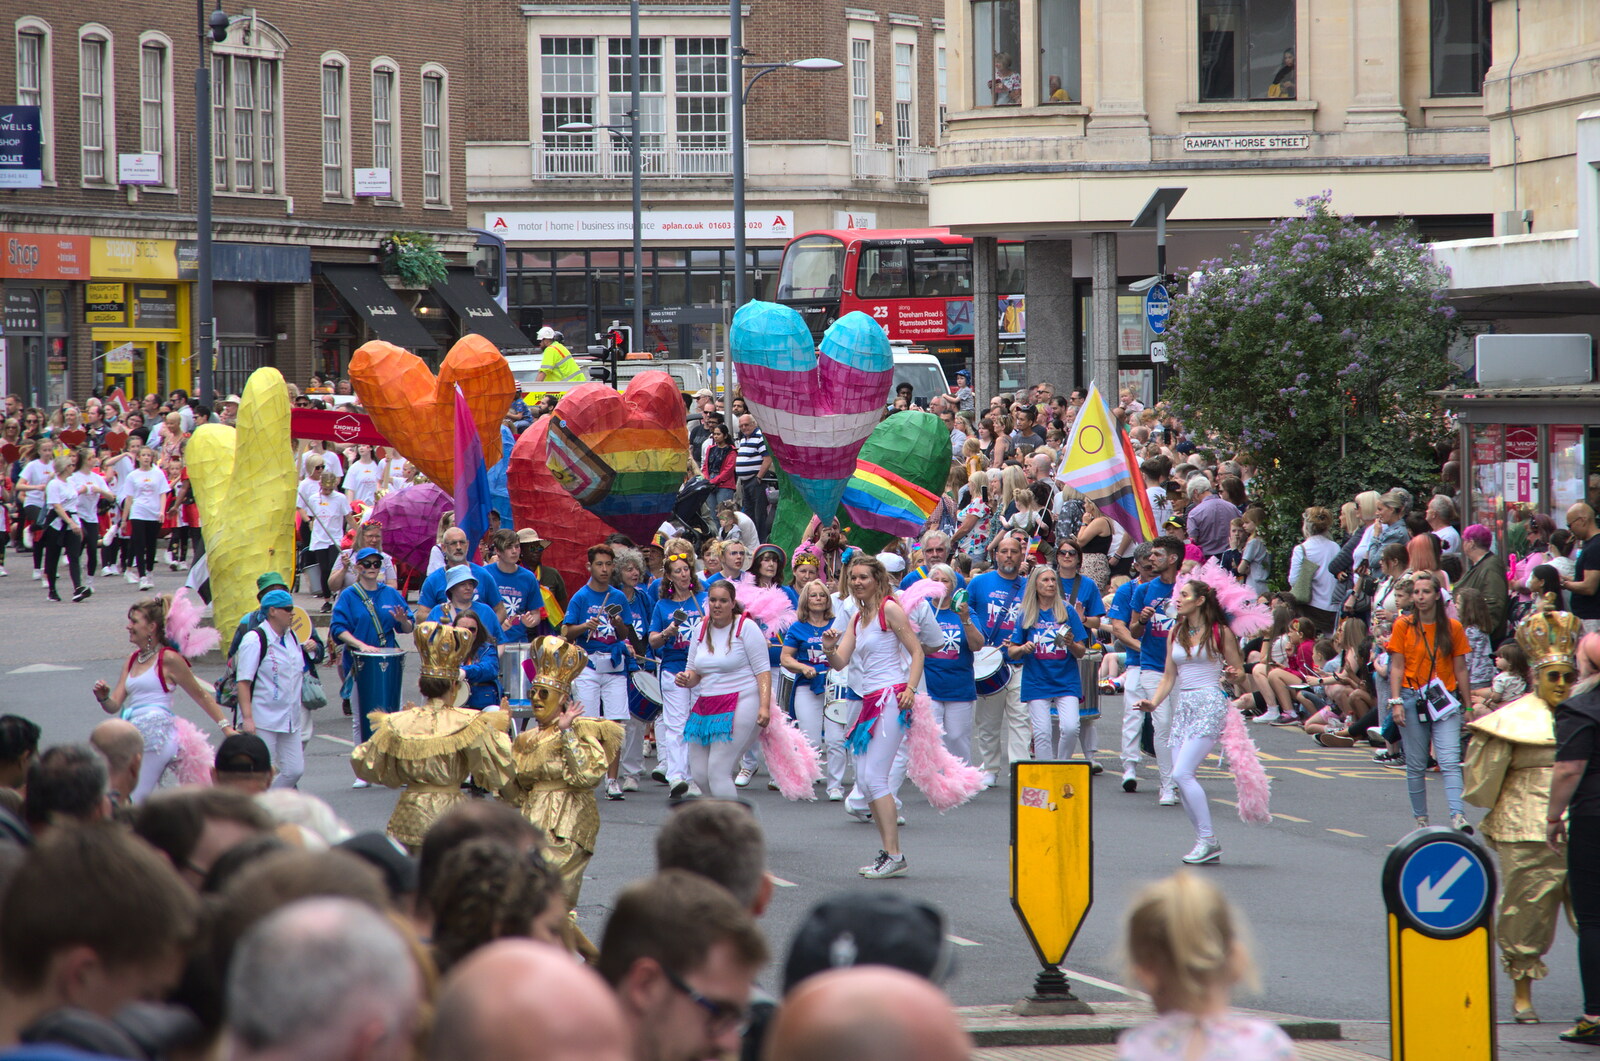 A samba group heads down the street from The Lord Mayor's Procession, Norwich, Norfolk - 2nd July 2022